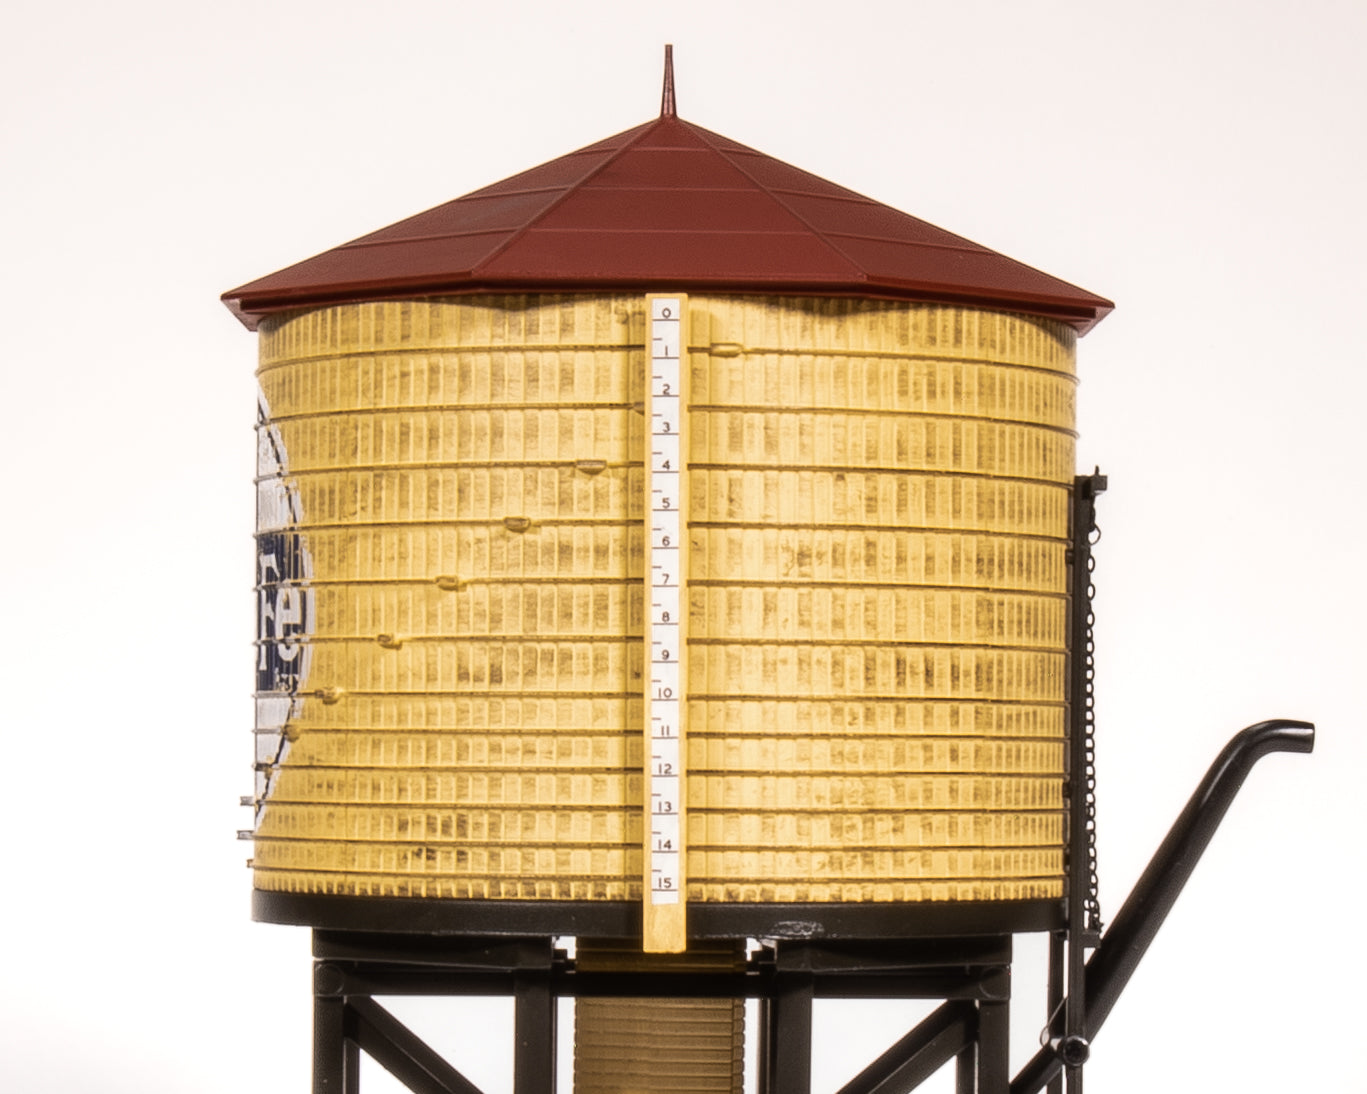 7914 Operating Water Tower w/ Sound, ATSF, Weathered, HO Default Title